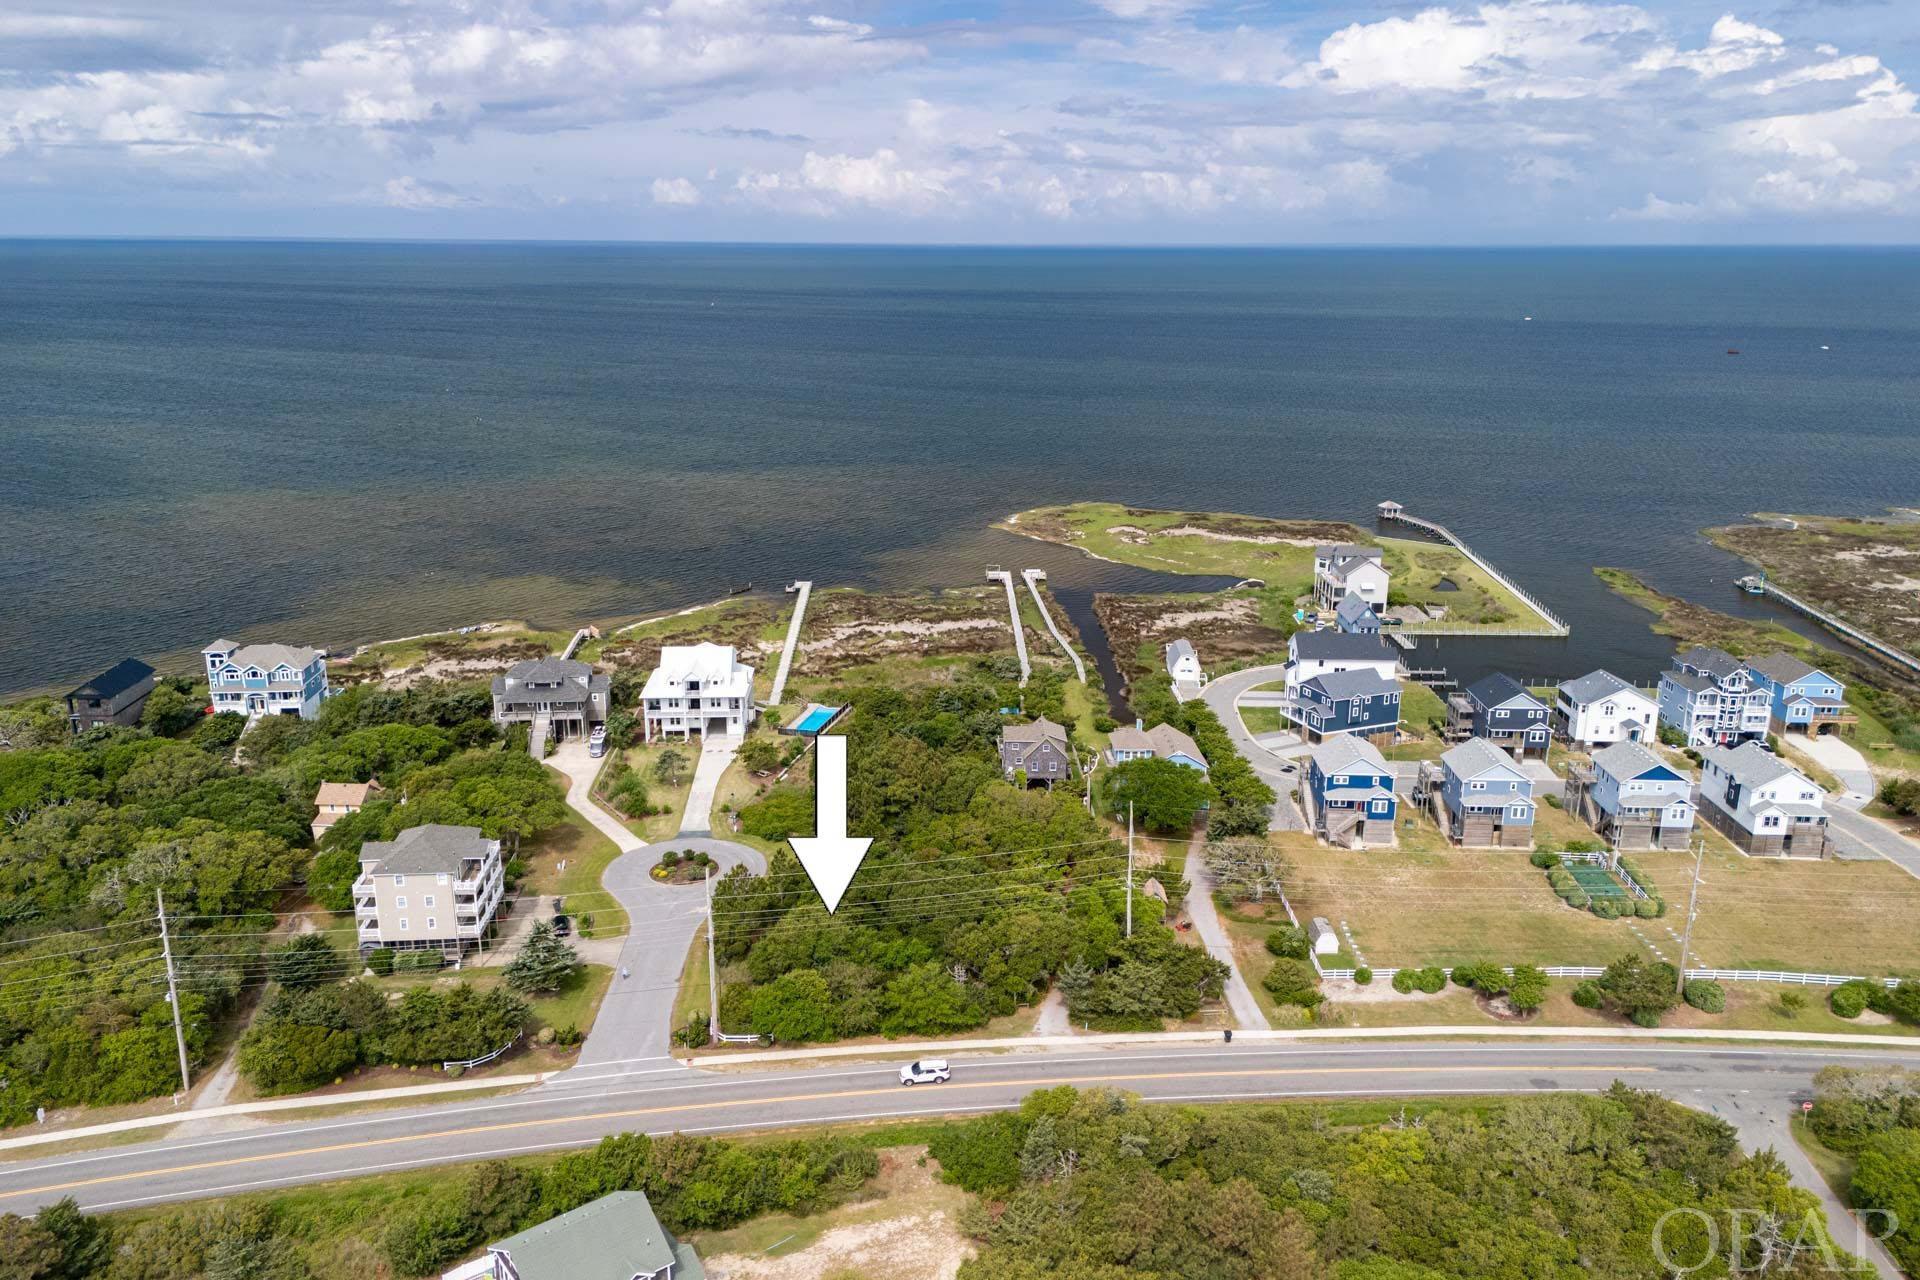 Semi Sound front homesite with potential for beautiful water views over the Pamlico Sound!  Situated on a 15,000 sq. ft. homesite in the South Beach subdivision of Salvo NC, this corner lot is ideally located on a cul-de-sac towards the South end of Salvo, close to Ramp 23 and the 4x4 beach access!  This property is adjacent to the Salvo muti-use path, where you can easily access the Salvo day use area which offers sound access, kayak and kiteboarding launch, outdoor showers, restrooms, and picnic area.  The South Beach subdivision offers parking next to the beach access path, and Hatteras Island is the perfect location on the Outer Banks for kiteboarding and endless water sports.  Just 3.1 miles to the Rodanthe Pier, where you can enjoy fishing and oceanside views, and just 31 miles to the Hatteras Ferry where you can day trip over to Ocracoke Island.  Build your OBX dream home and enjoy endless Hatteras Island sunsets!